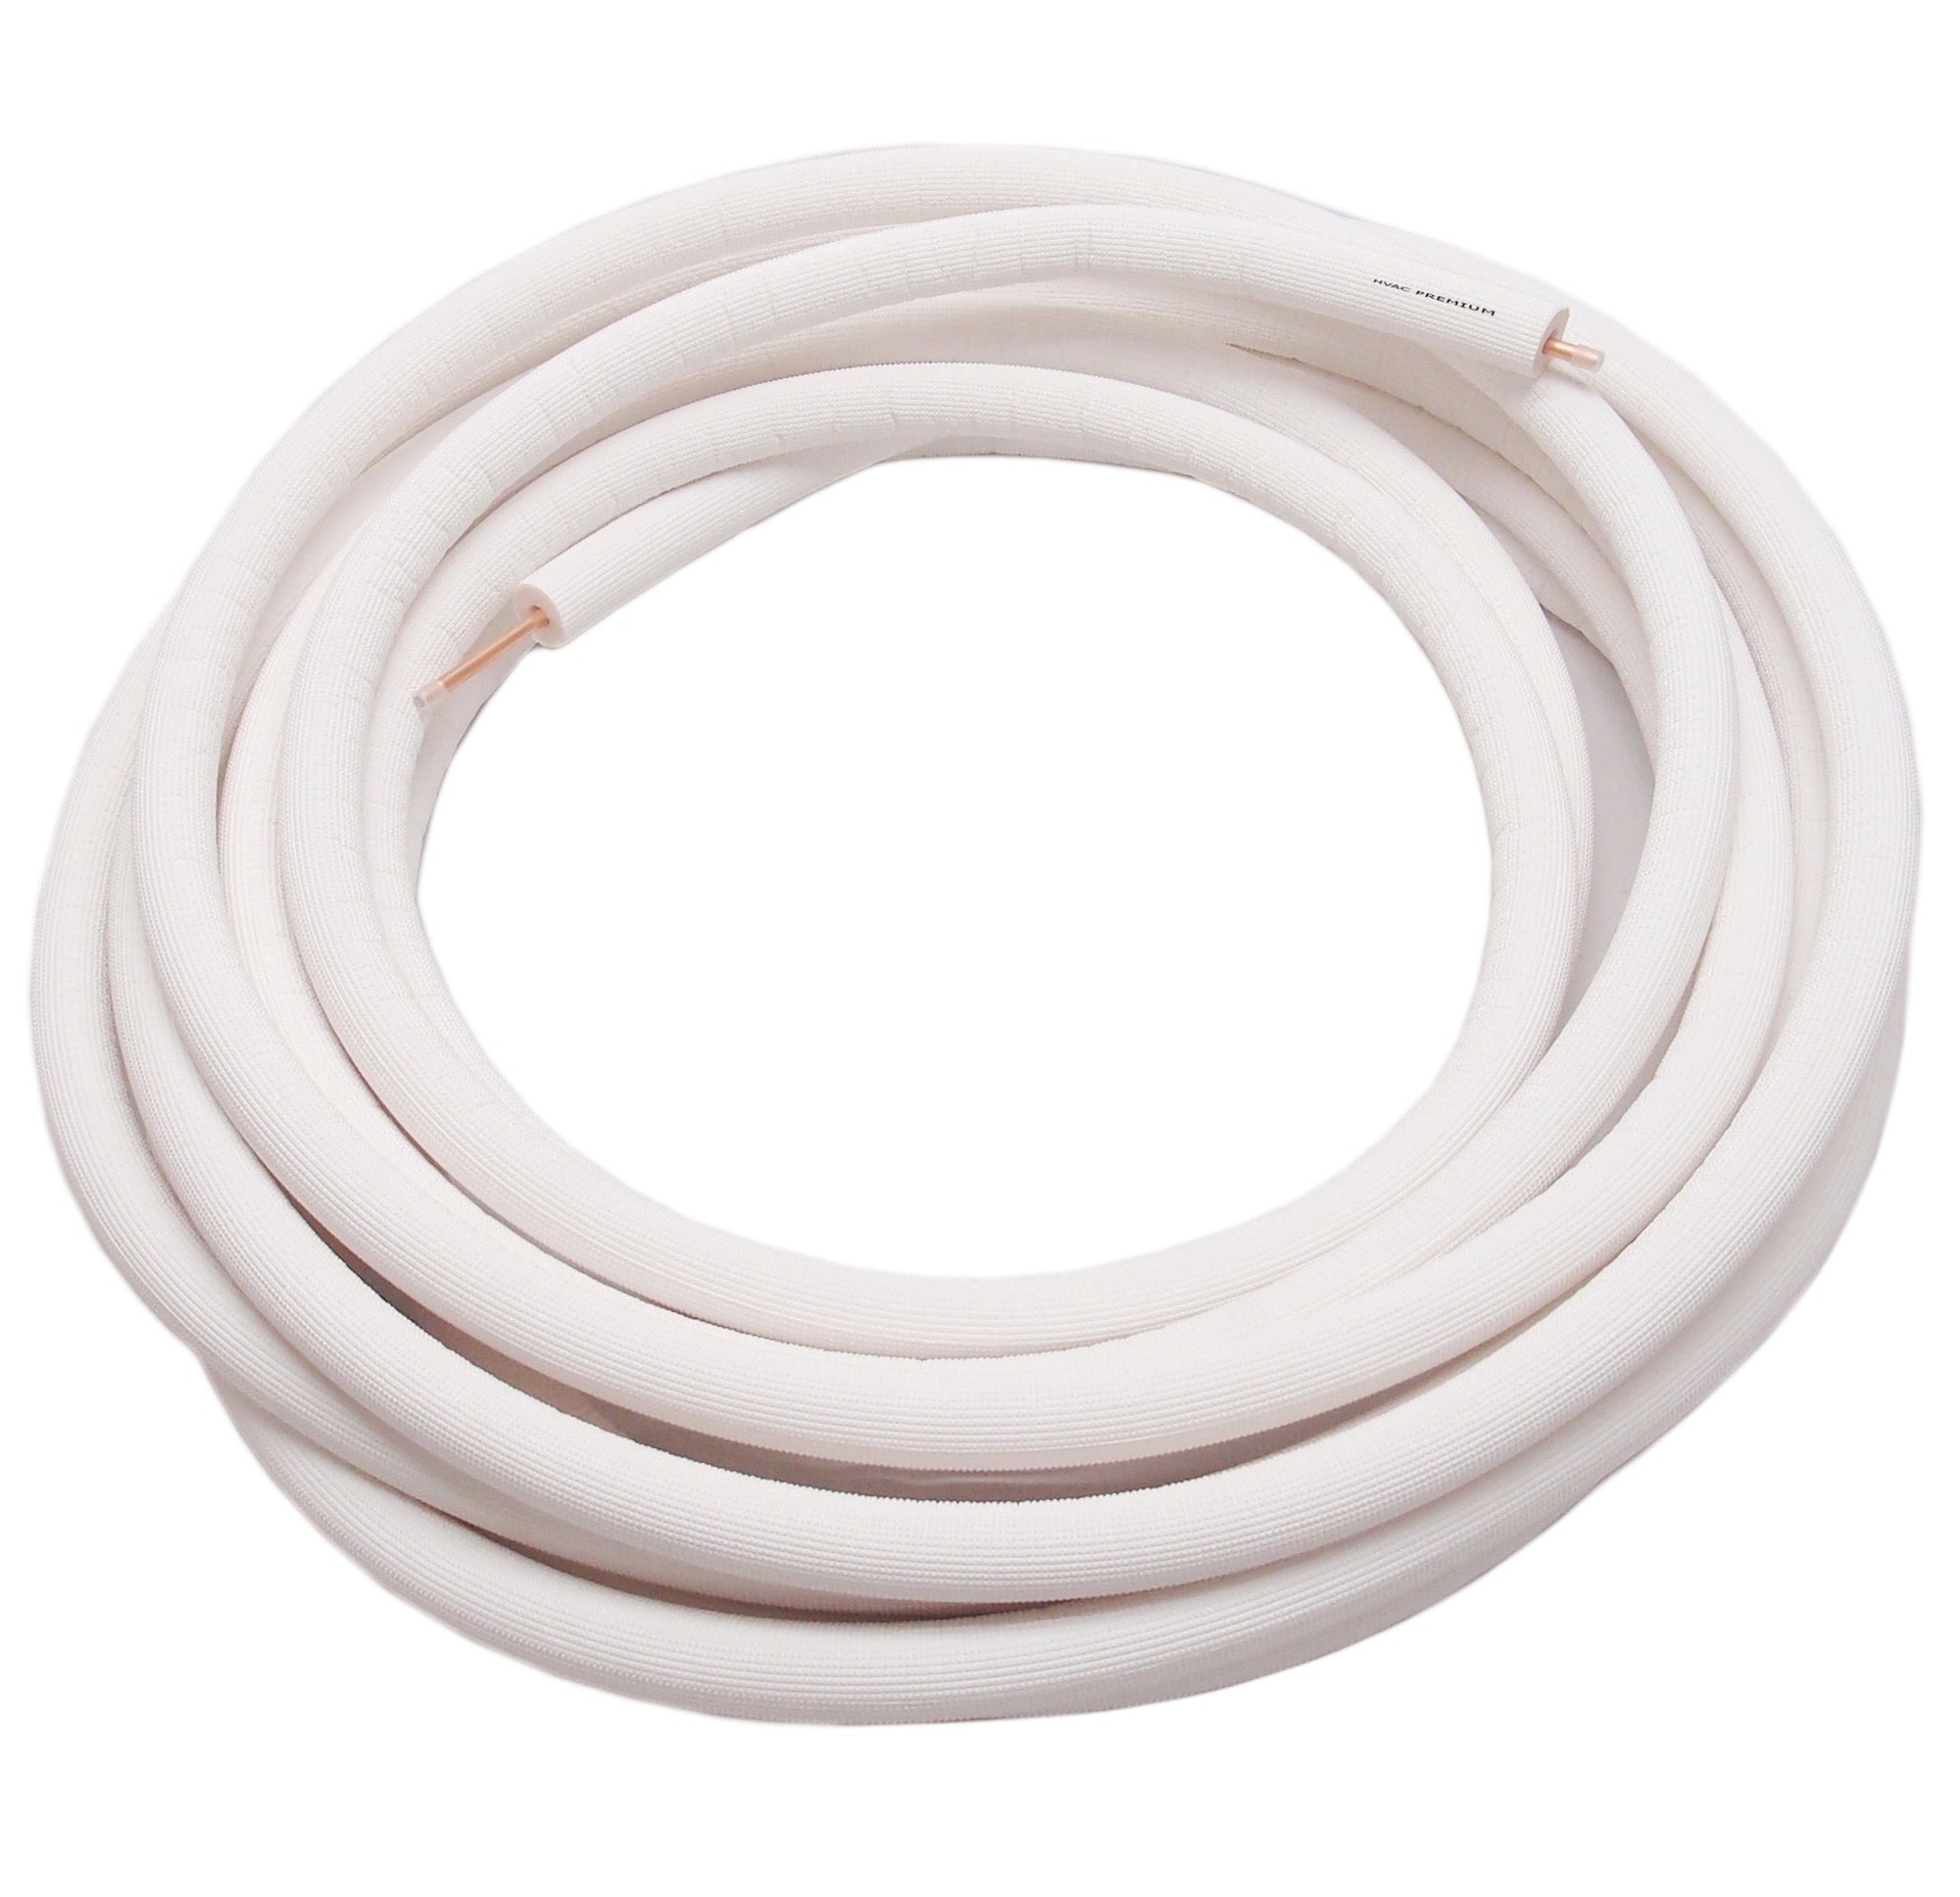 7/8" Insulated Copper Coil Line - Seamless Pipe Tube for HVAC, Refrigerant - 1/2" White Insulation - 35' Long